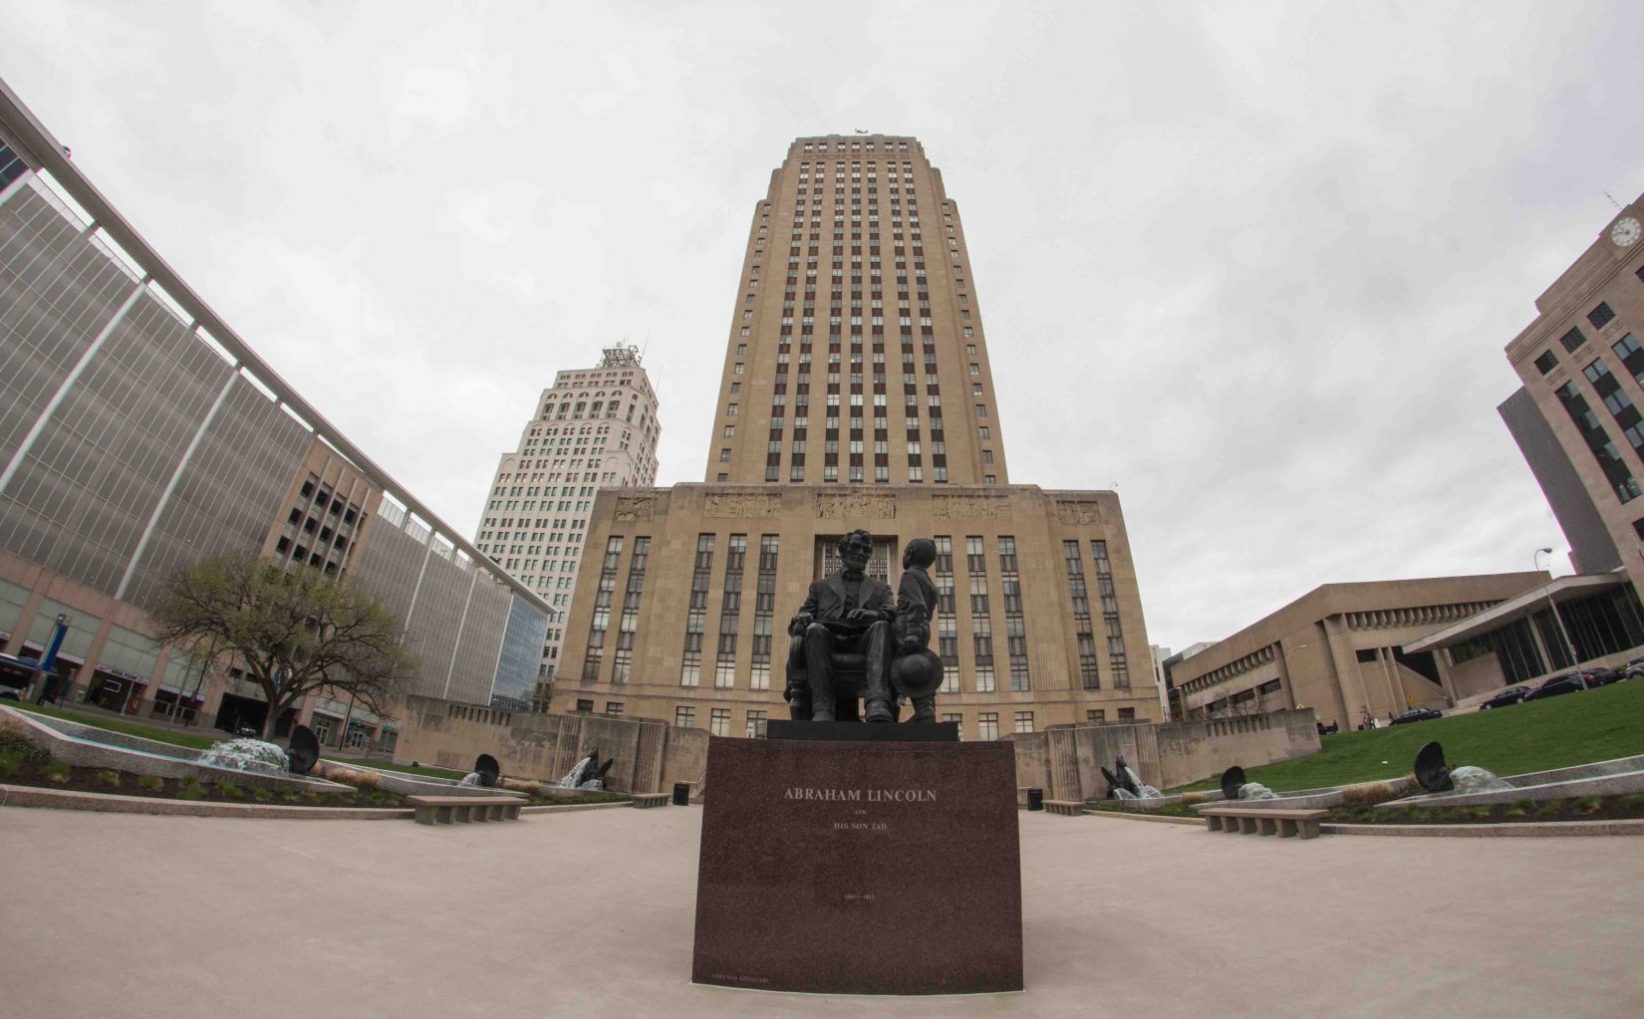 Concerned tech leaders pen amicable yet stern letter on KCMO’s proposed Airbnb, Homeaway rules